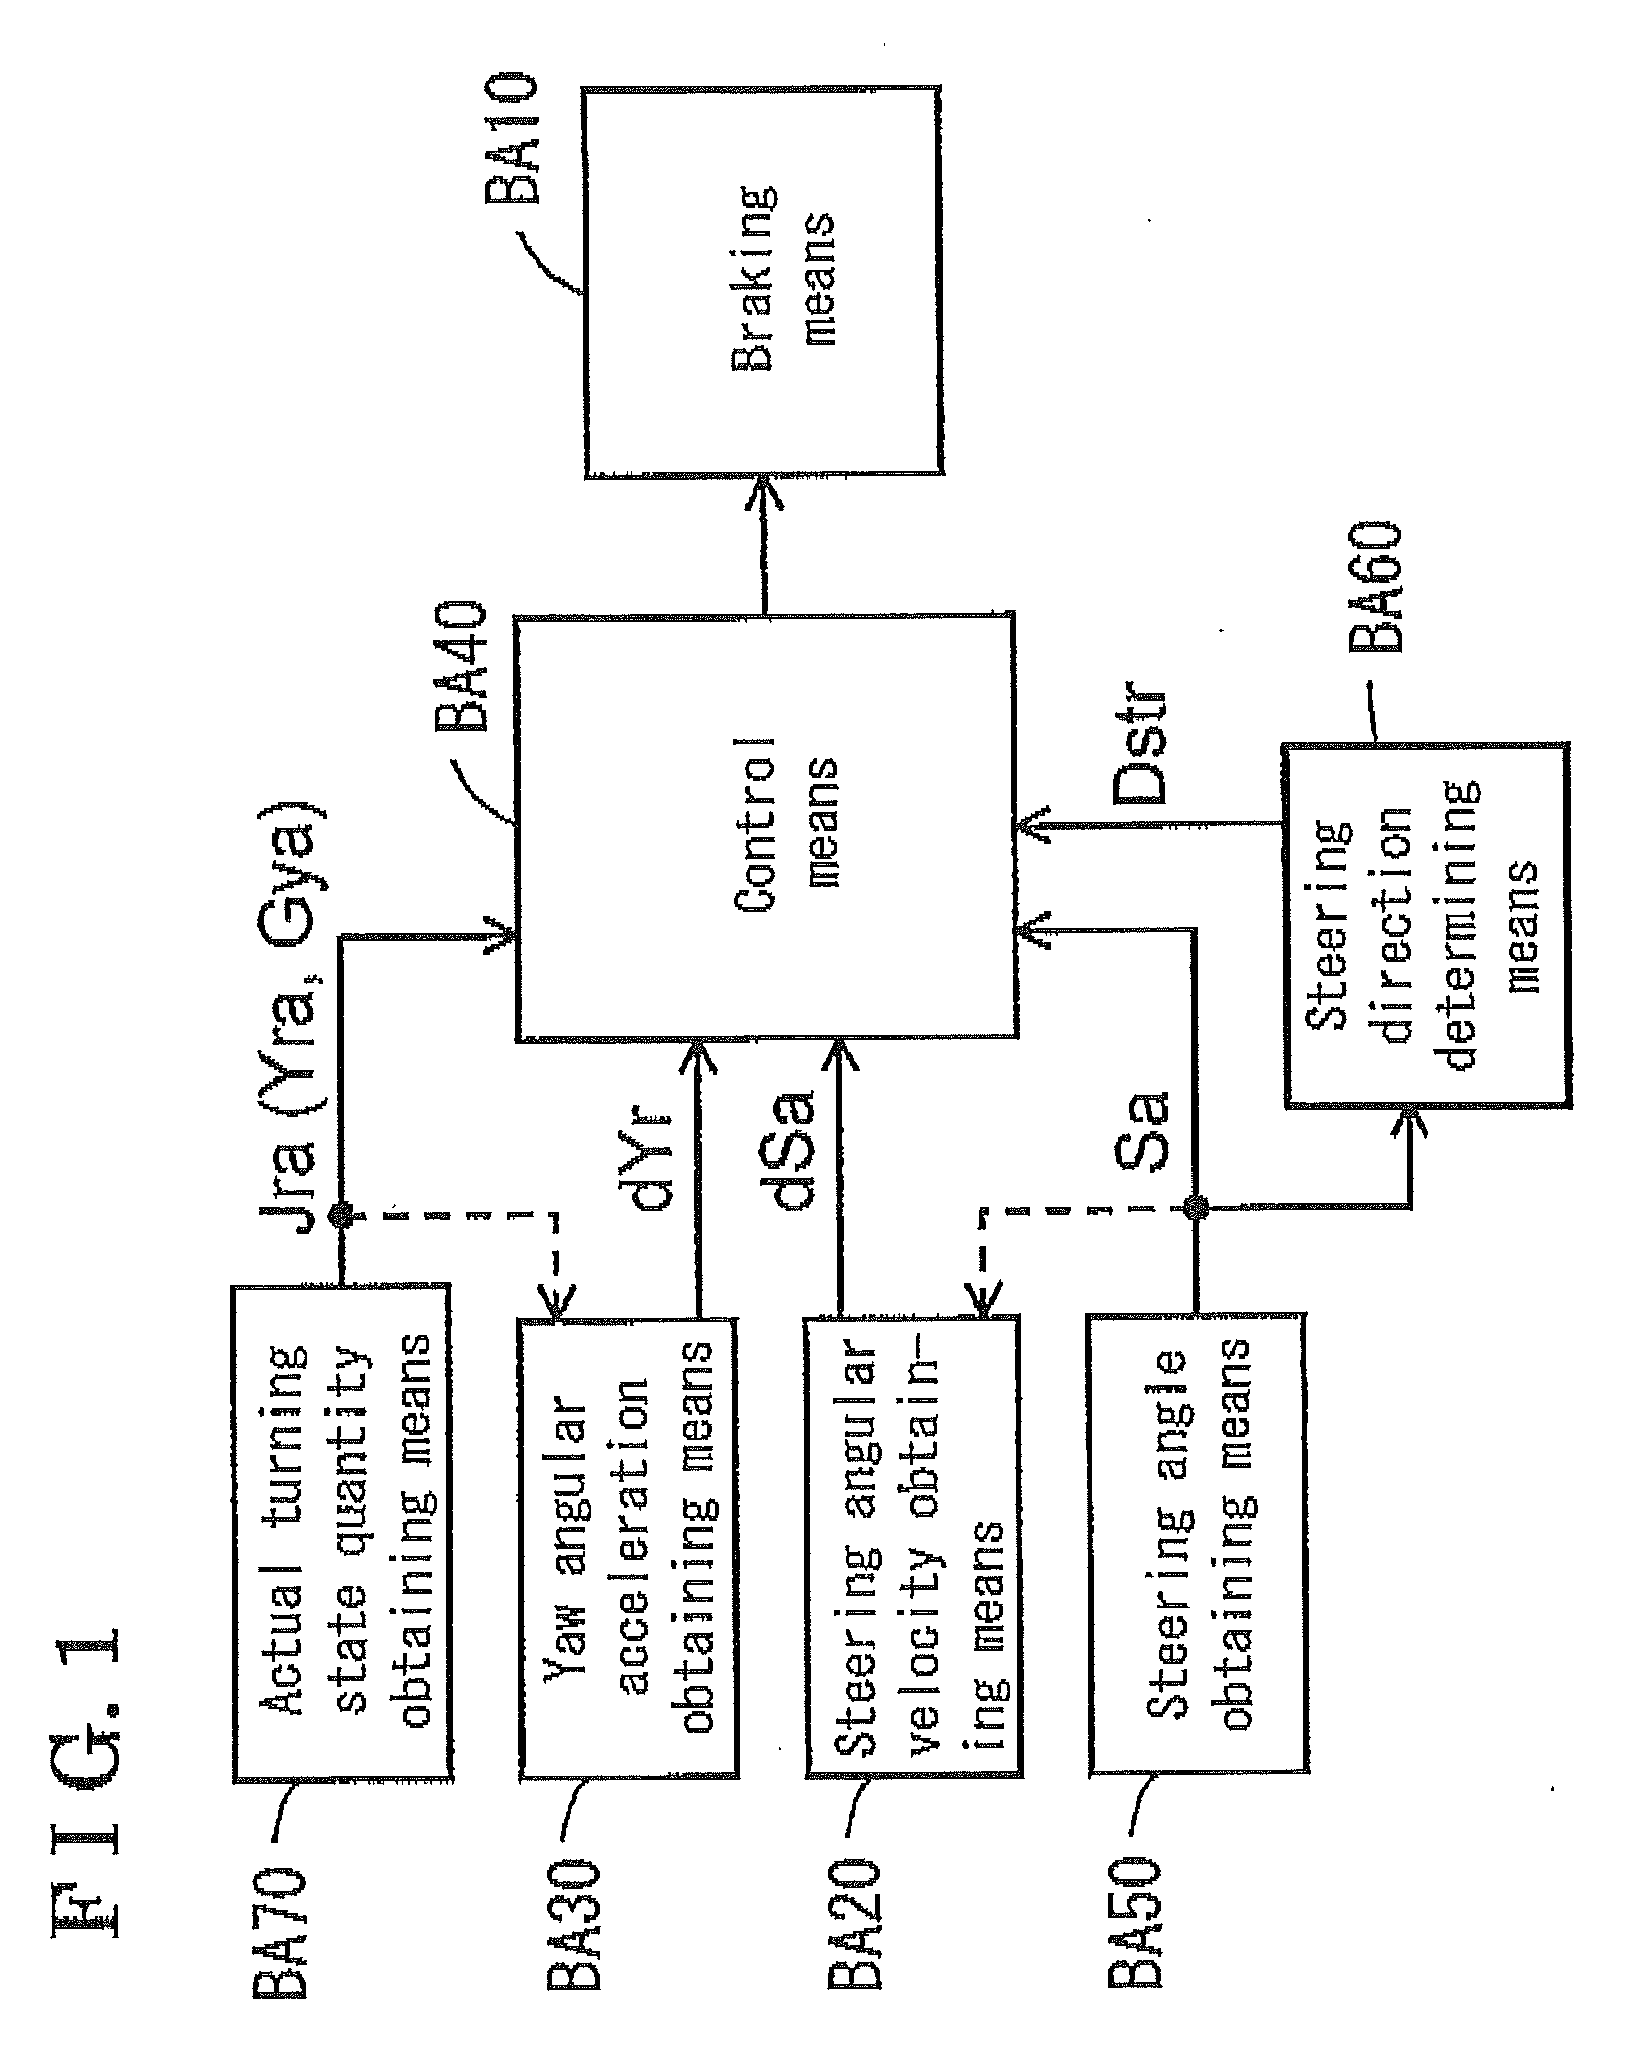 Motion control device for vehicle